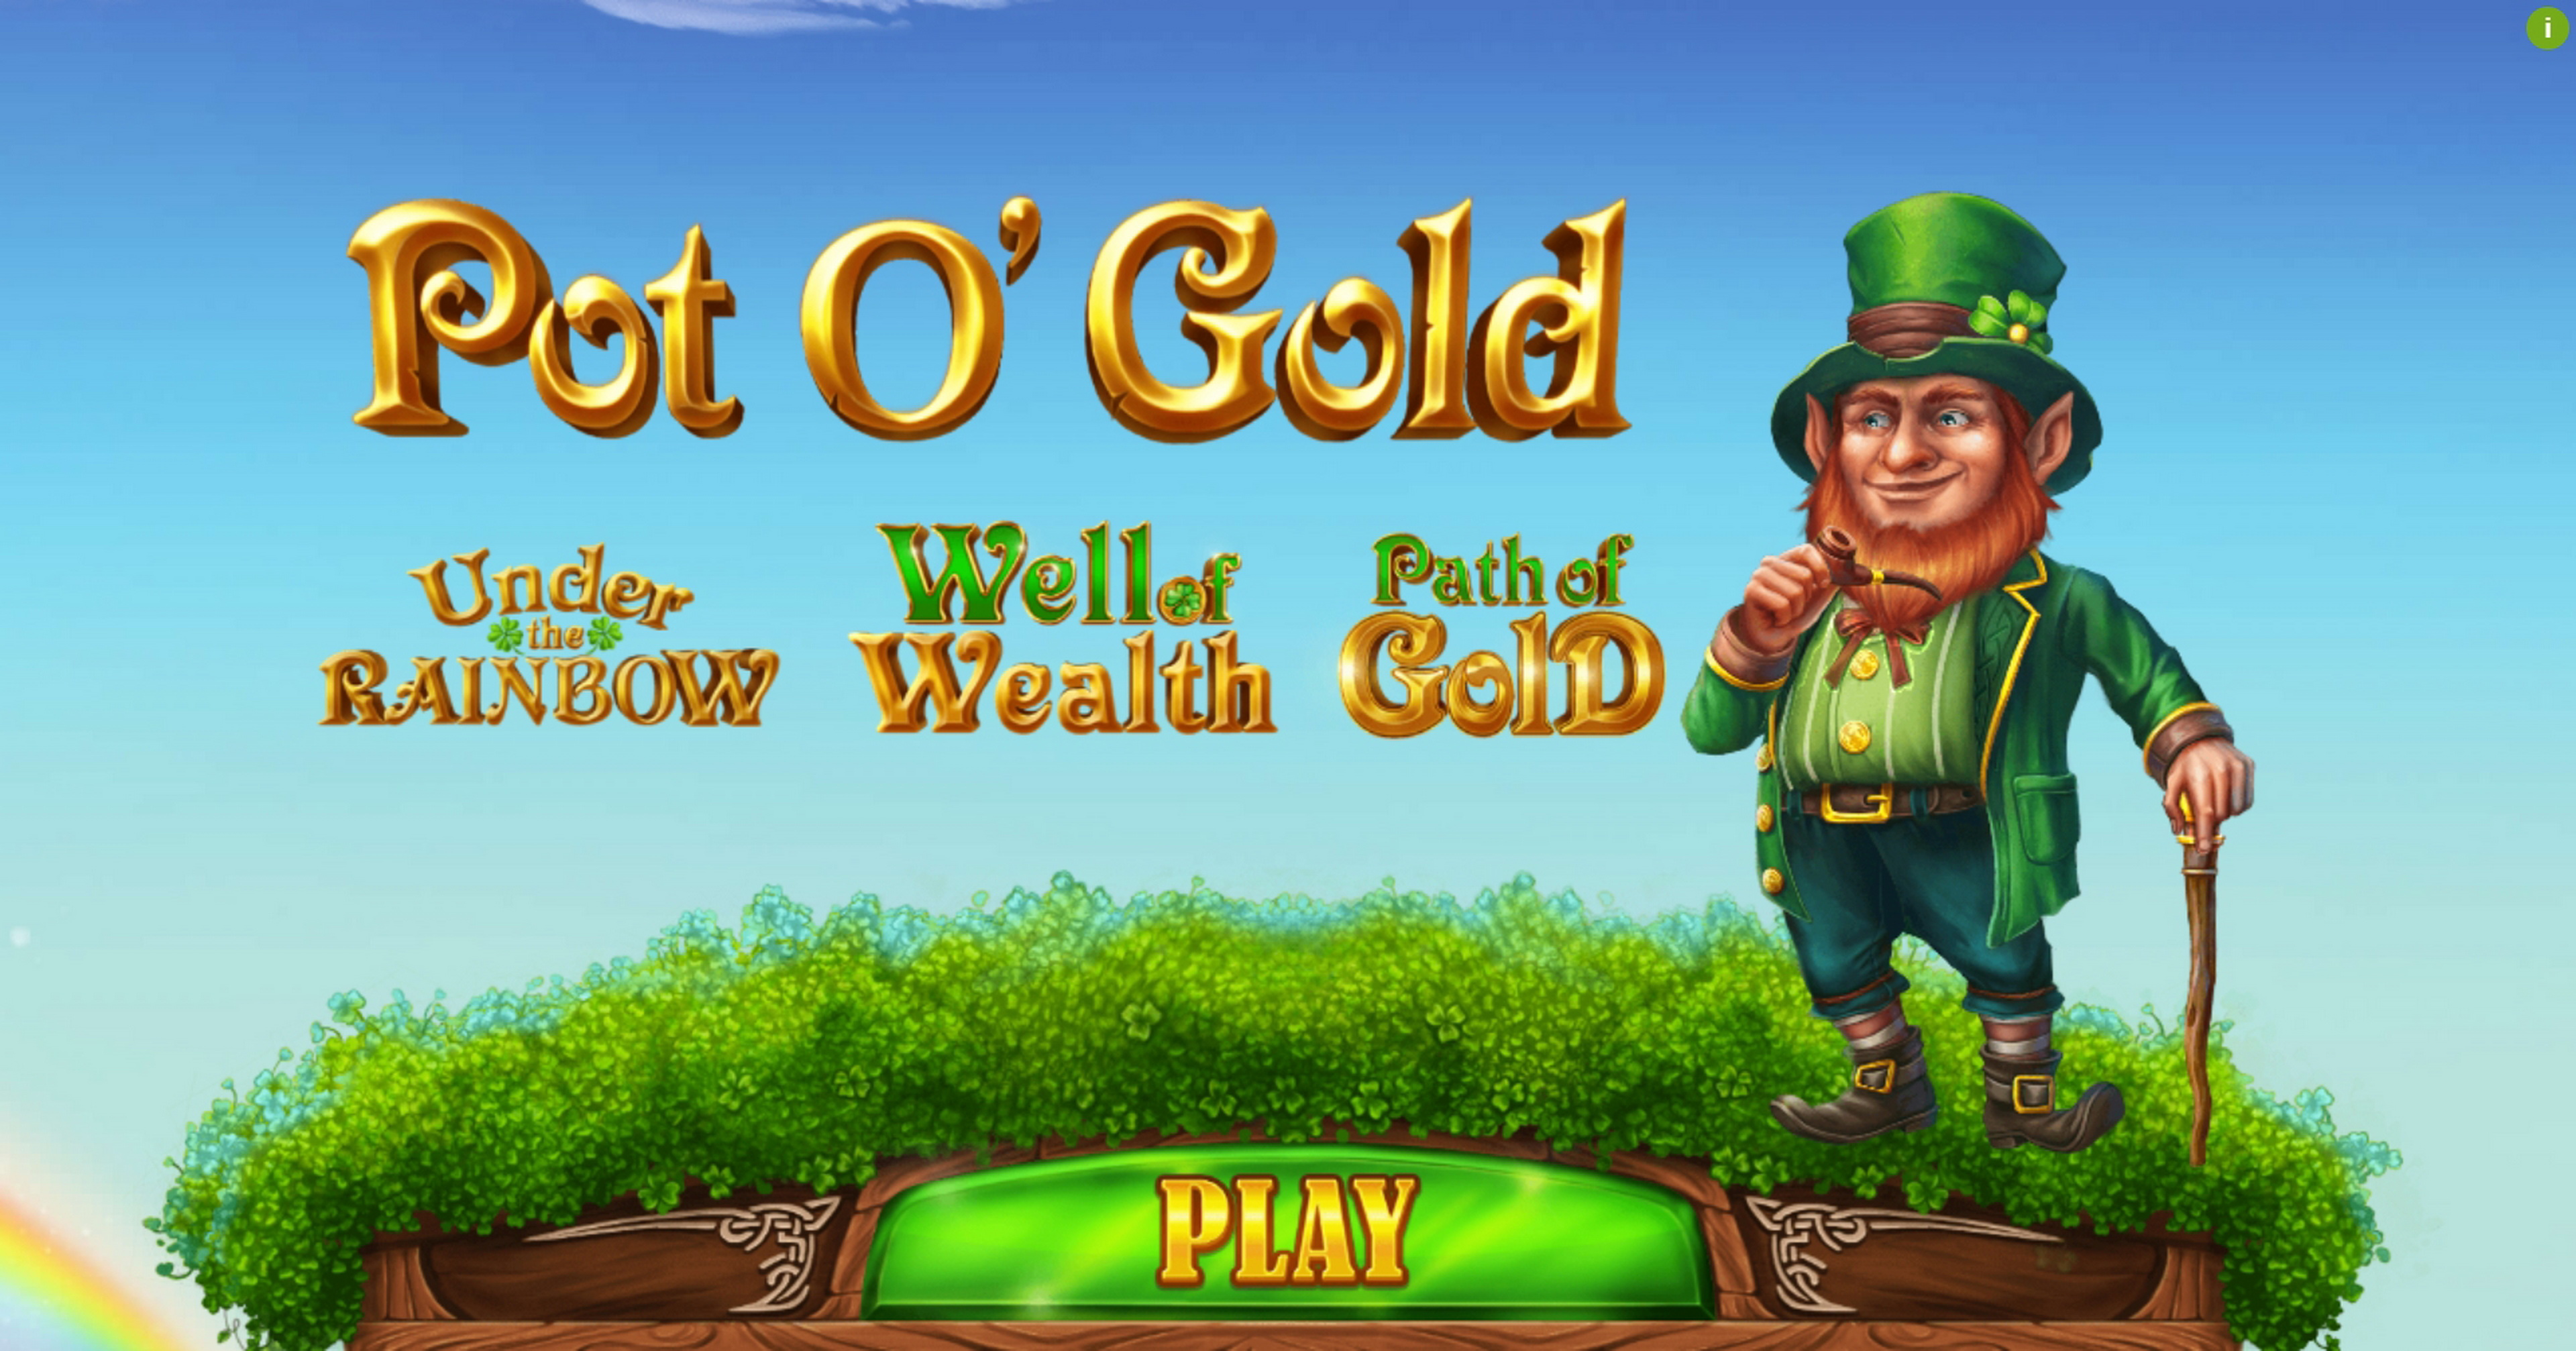 Play Pot O'Gold Free Casino Slot Game by PariPlay